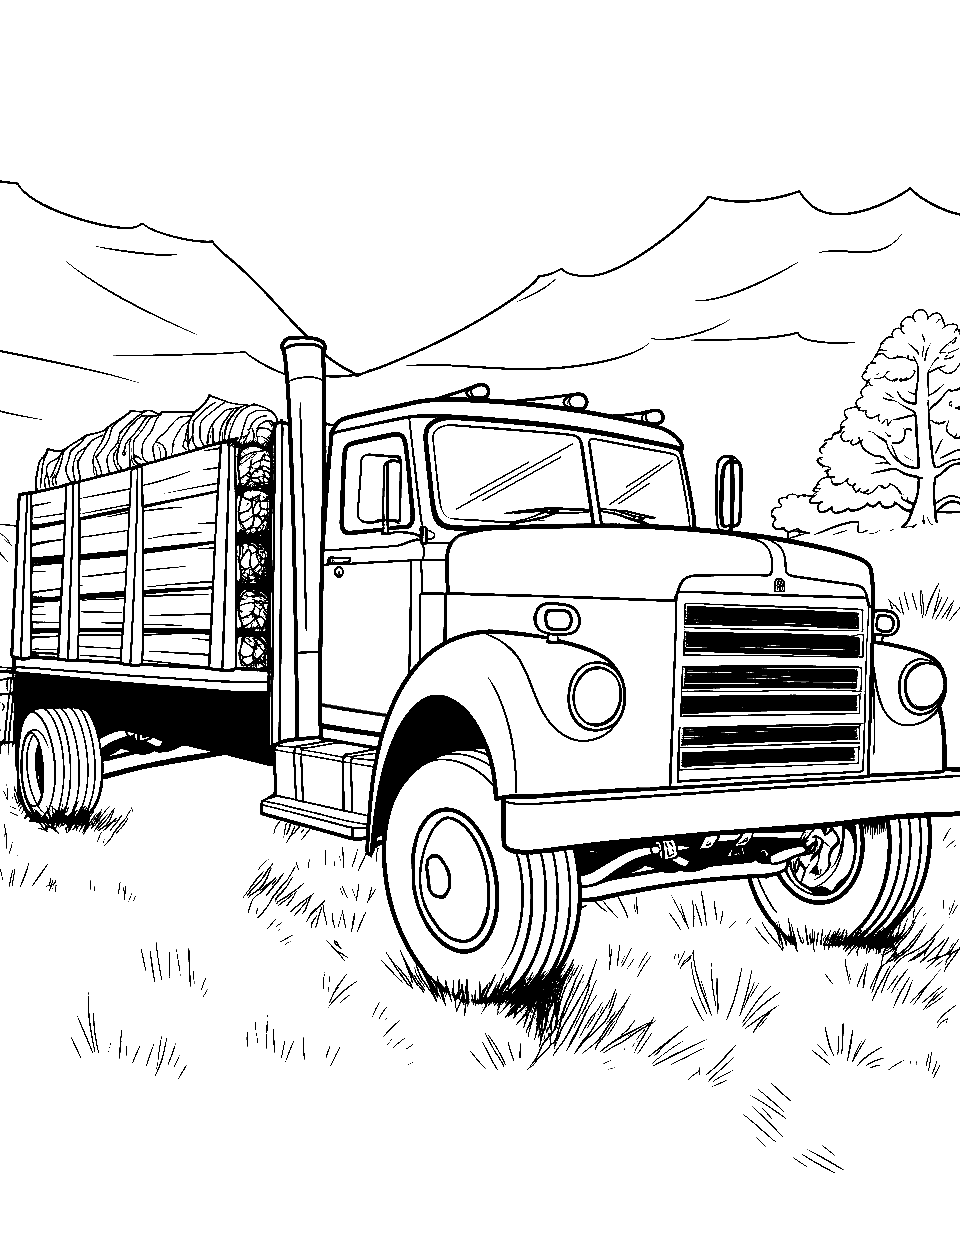 Flatbed on the Farm Coloring Page - A flatbed truck transporting bales of hay across a peaceful farm.